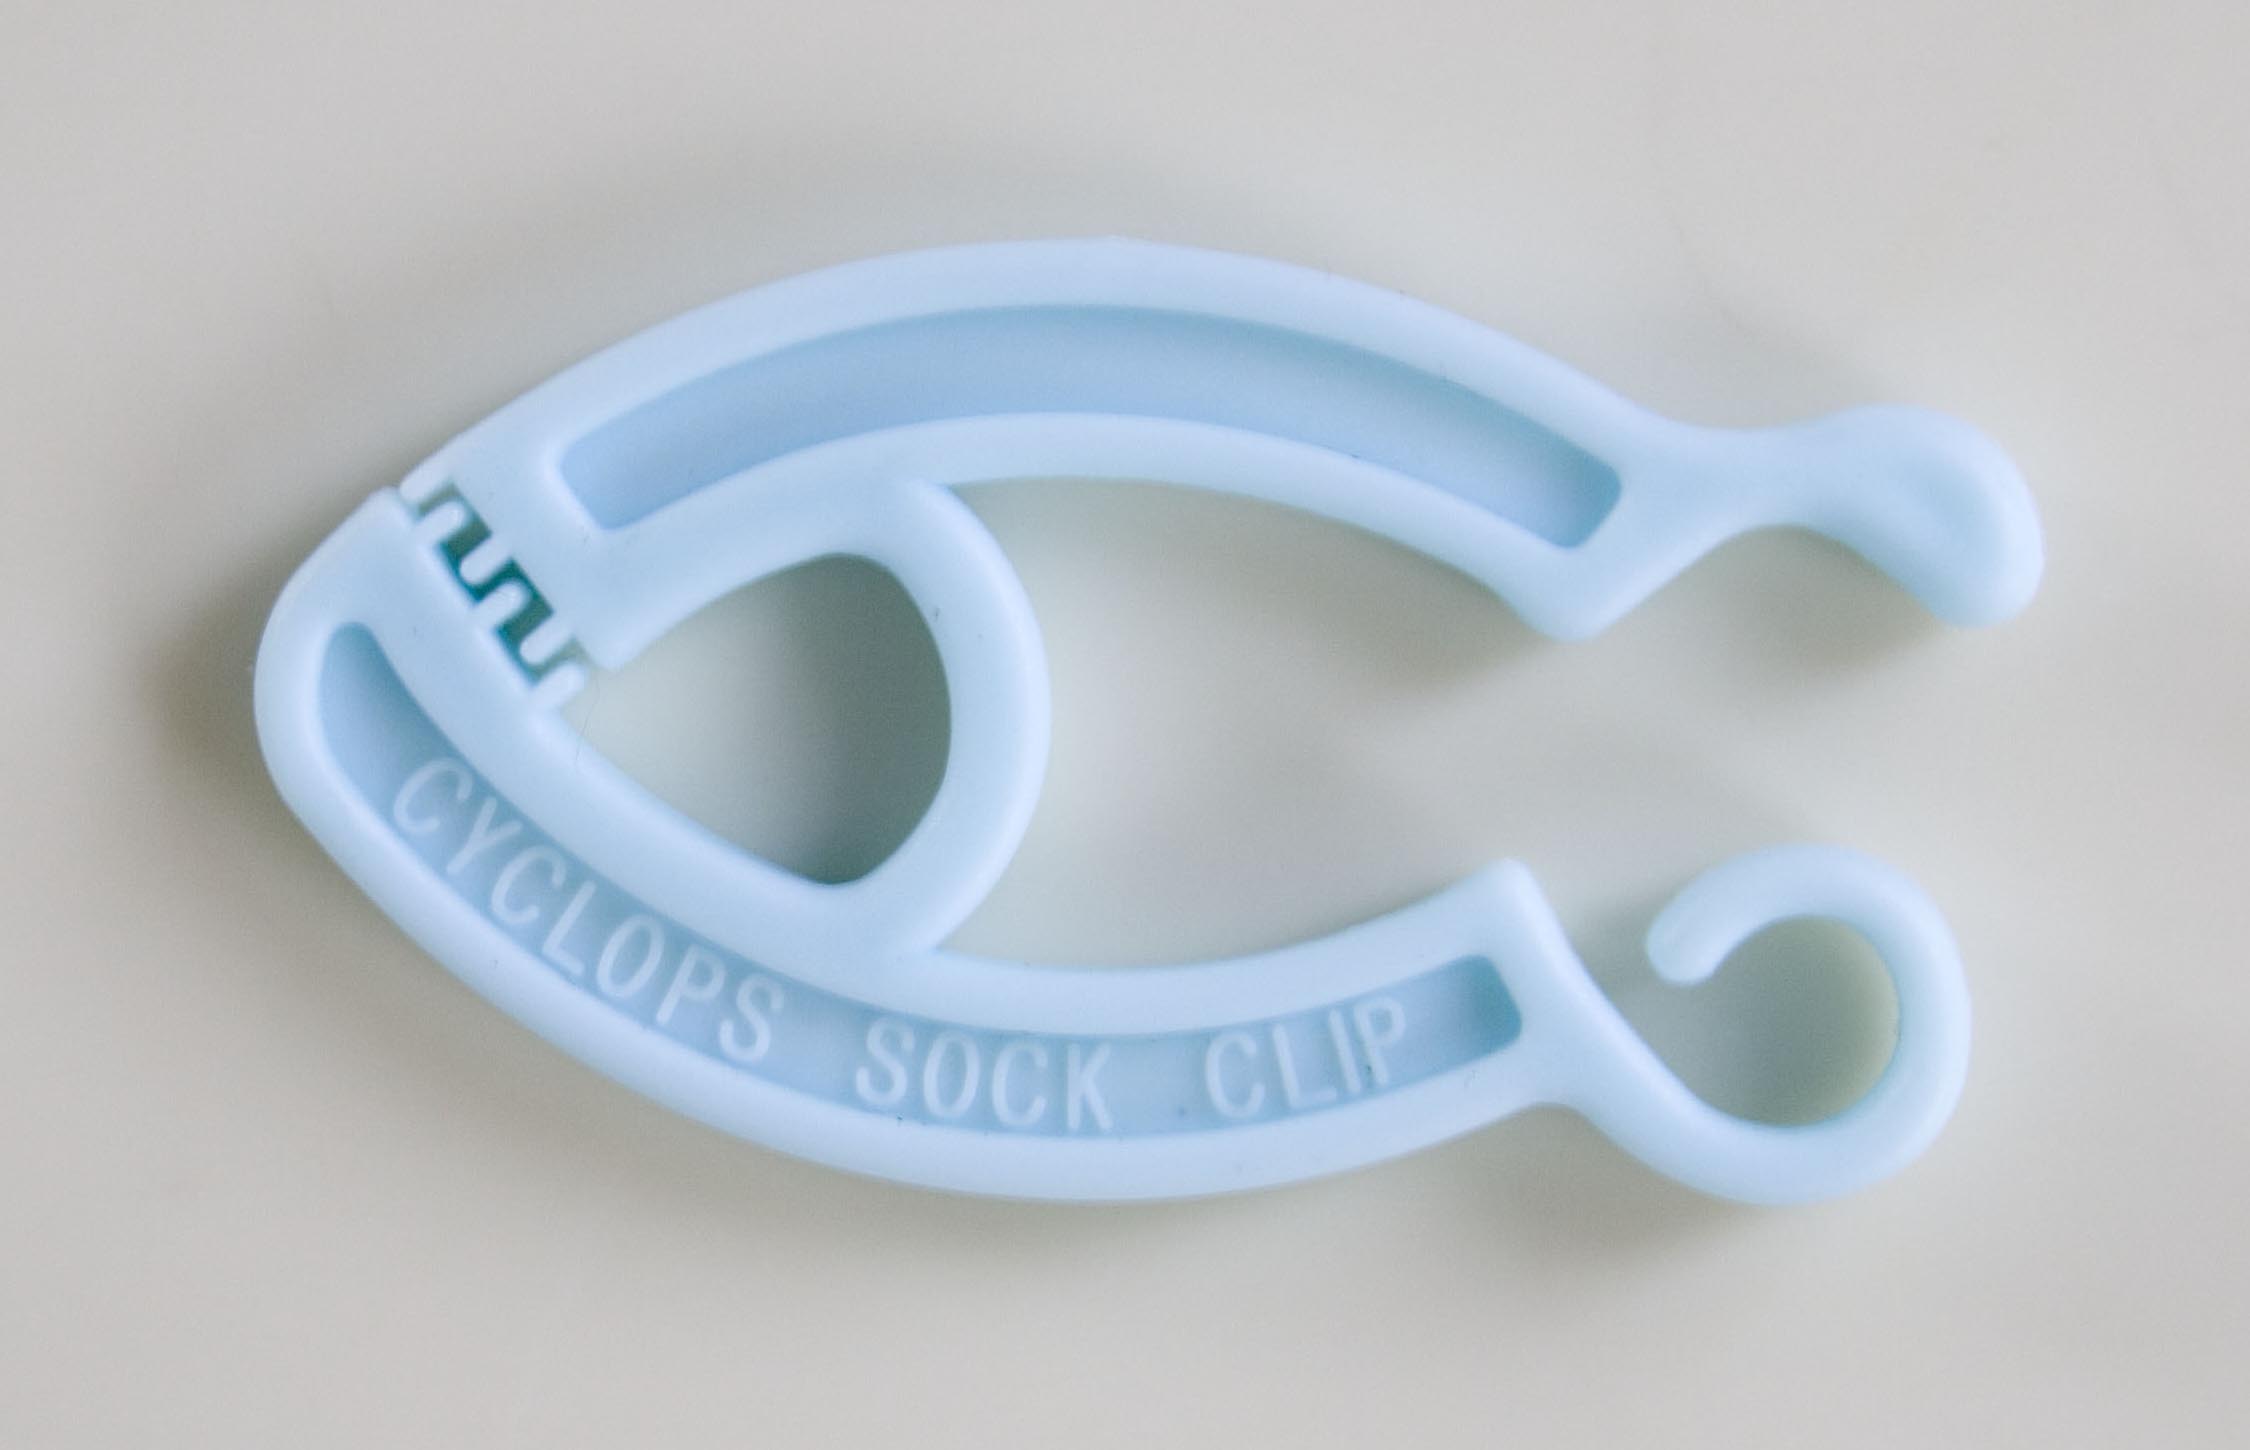 Socks Clip By Cyclops sock clip limited